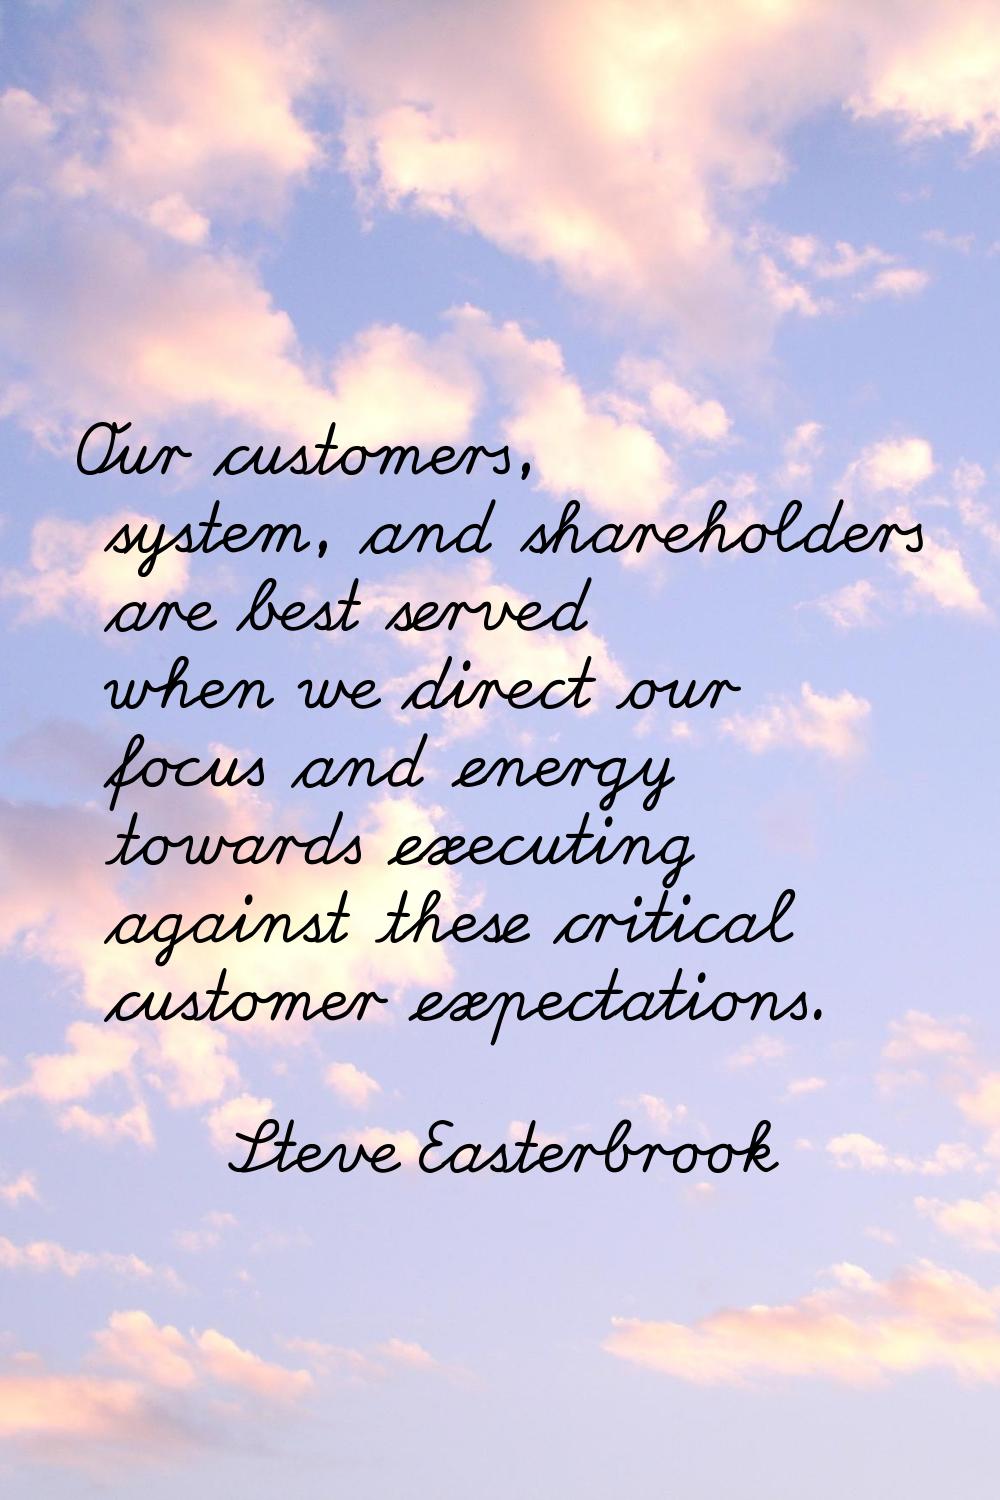 Our customers, system, and shareholders are best served when we direct our focus and energy towards